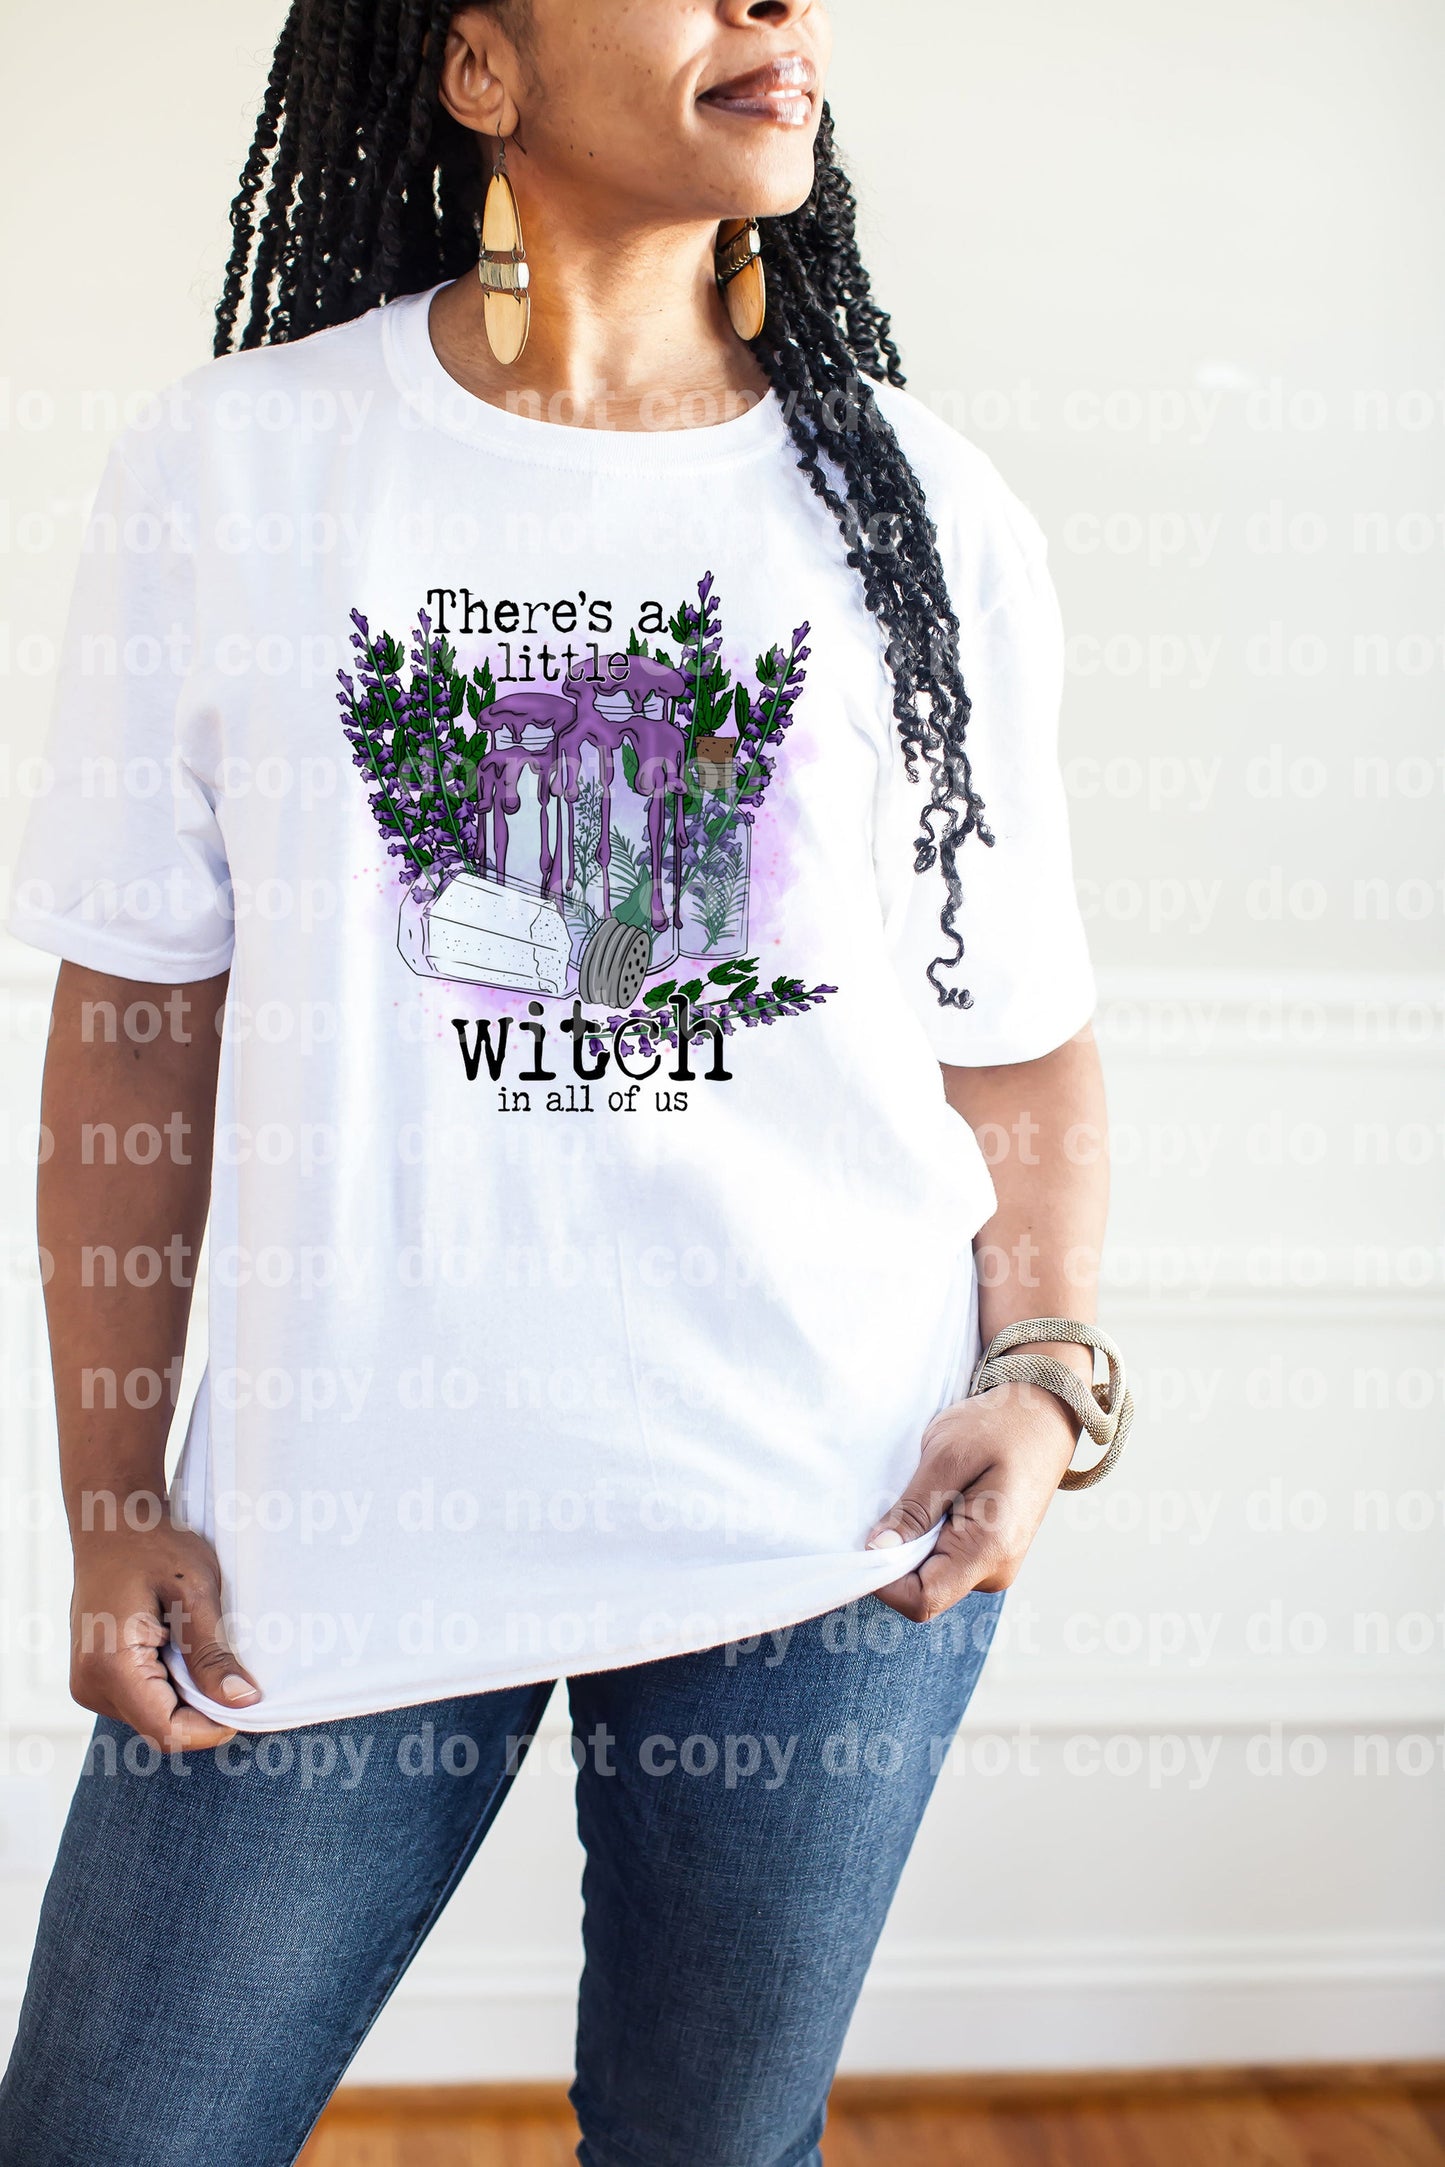 There's A Little Witch In All Of Us Dream Print or Sublimation Print